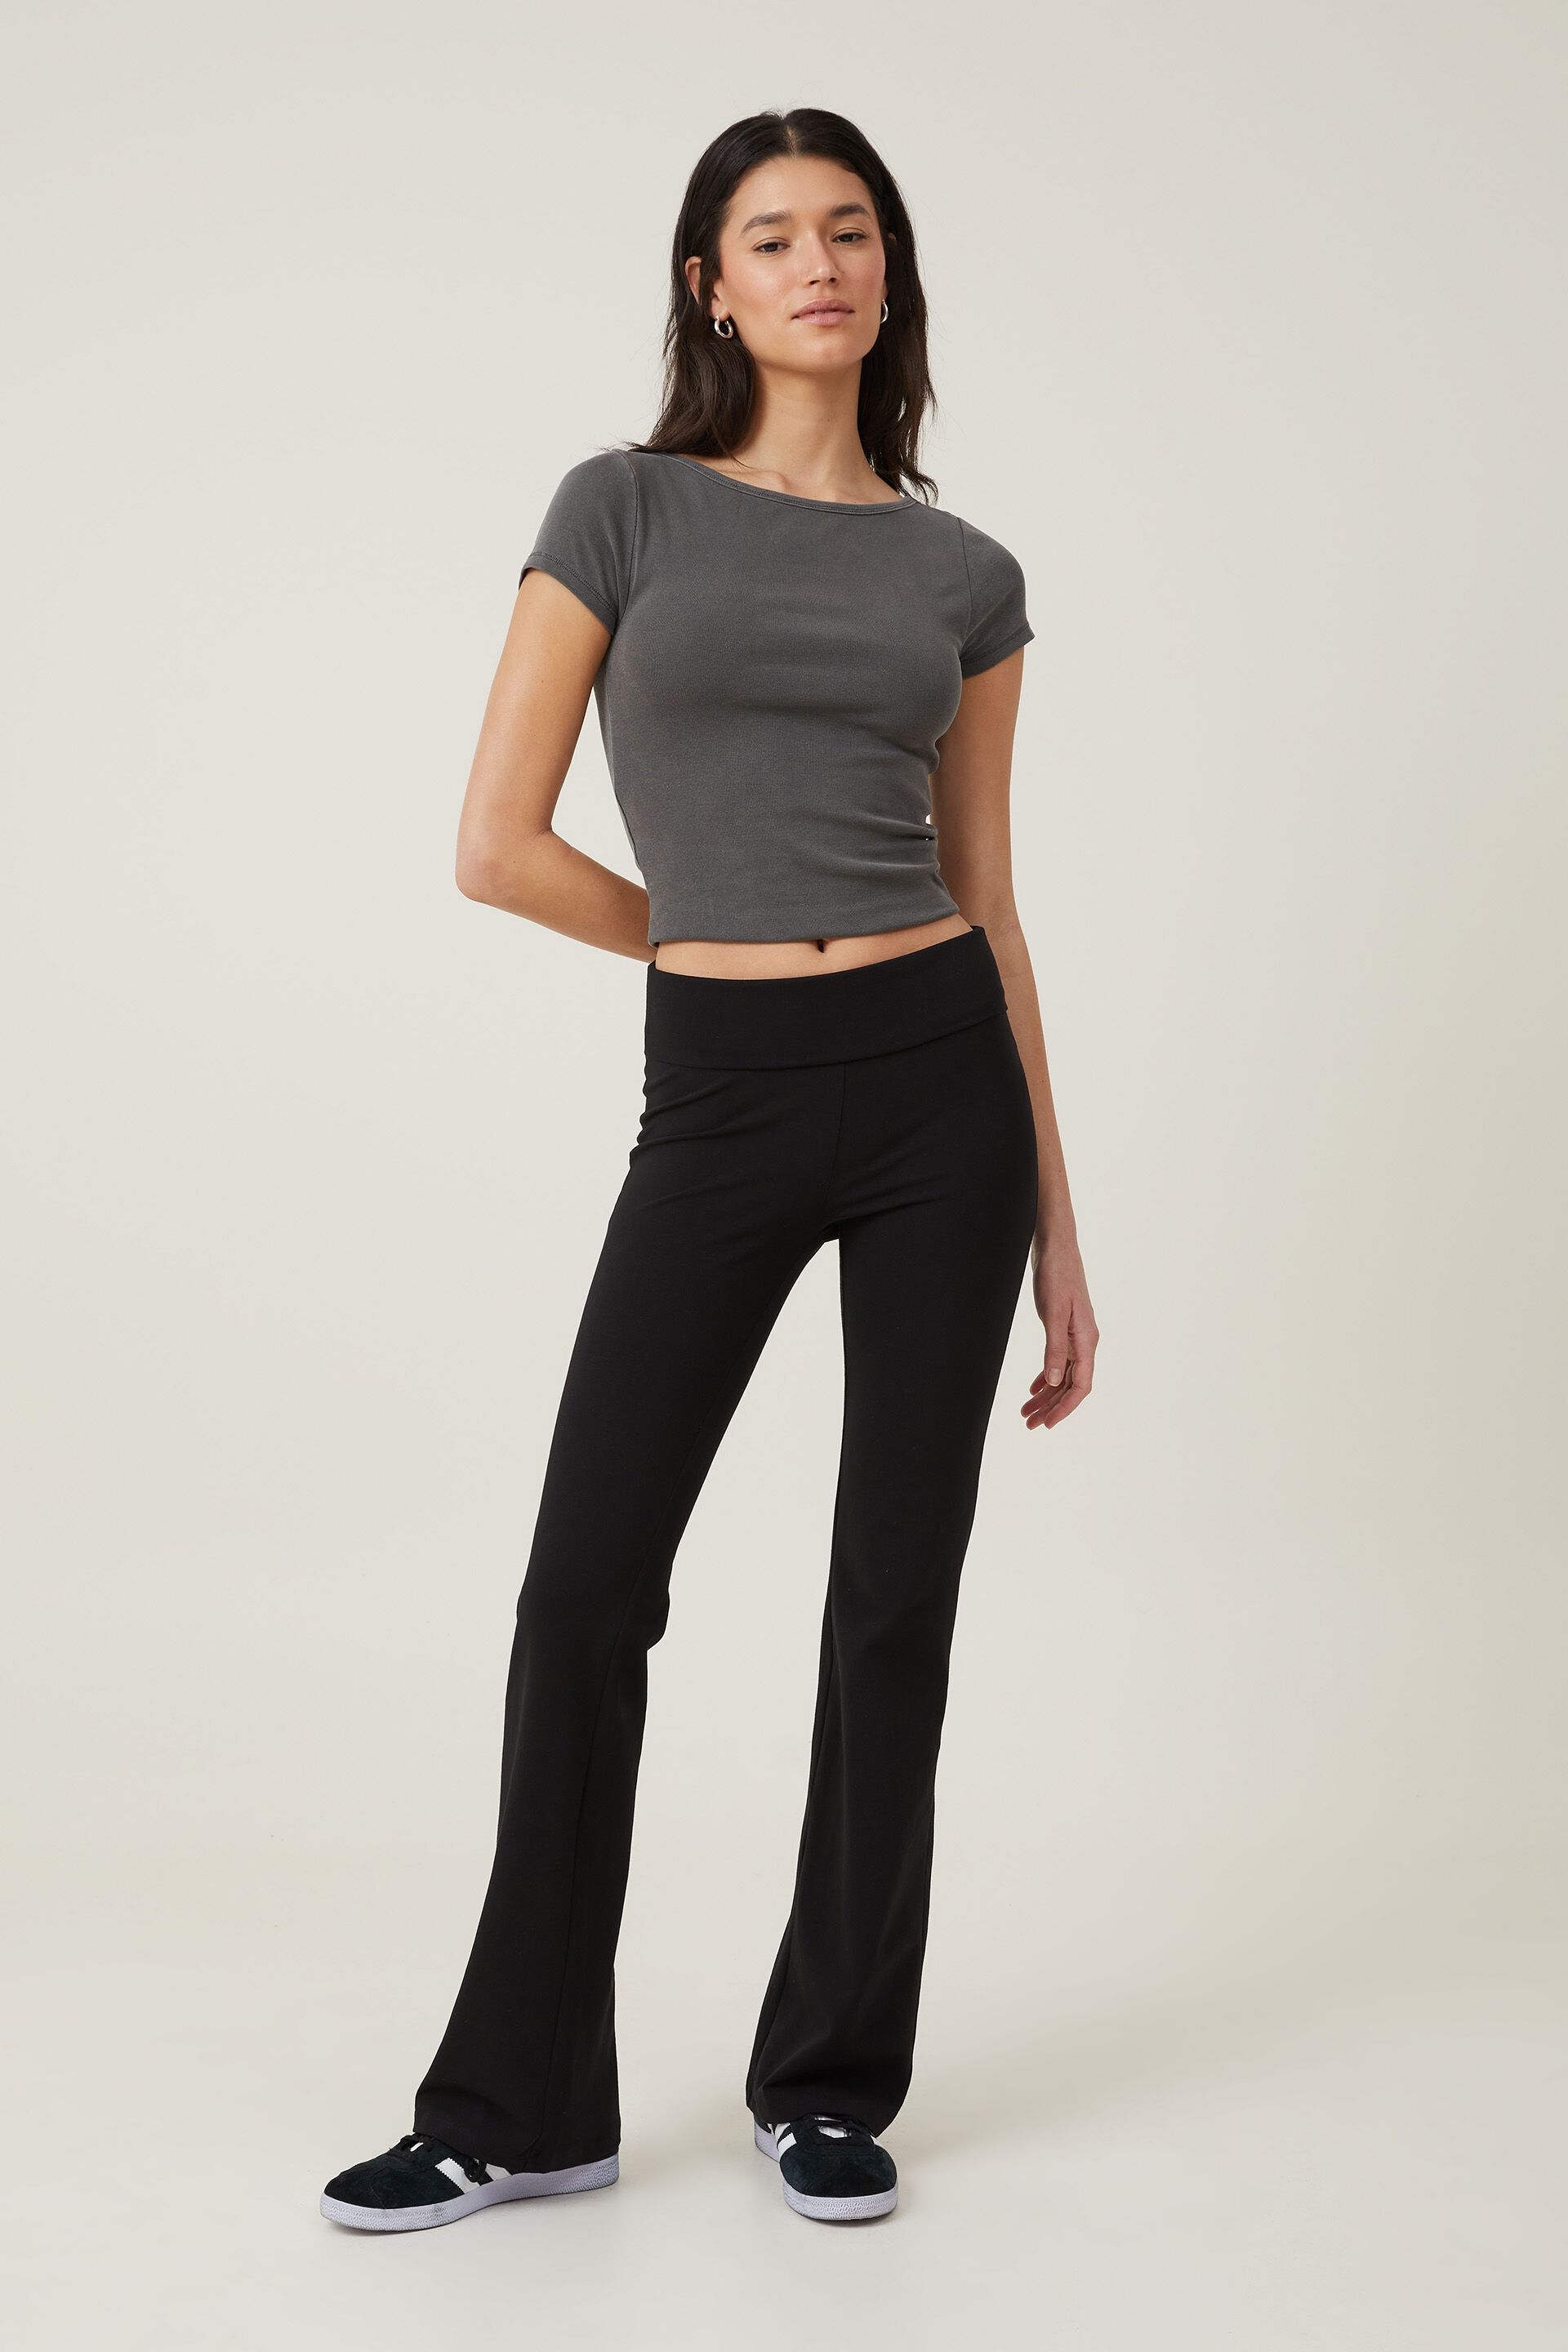 Jeans & Trousers | Black Low Waist Trousers | Freeup